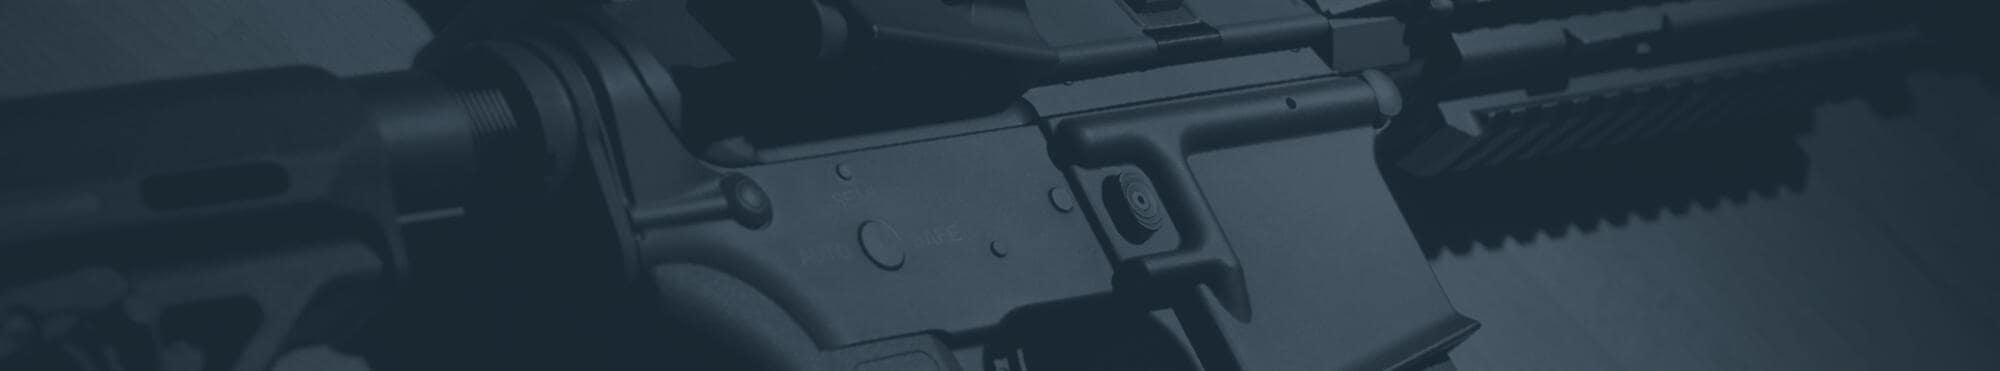 How to prevent FFL revocation by ensuring ATF compliance